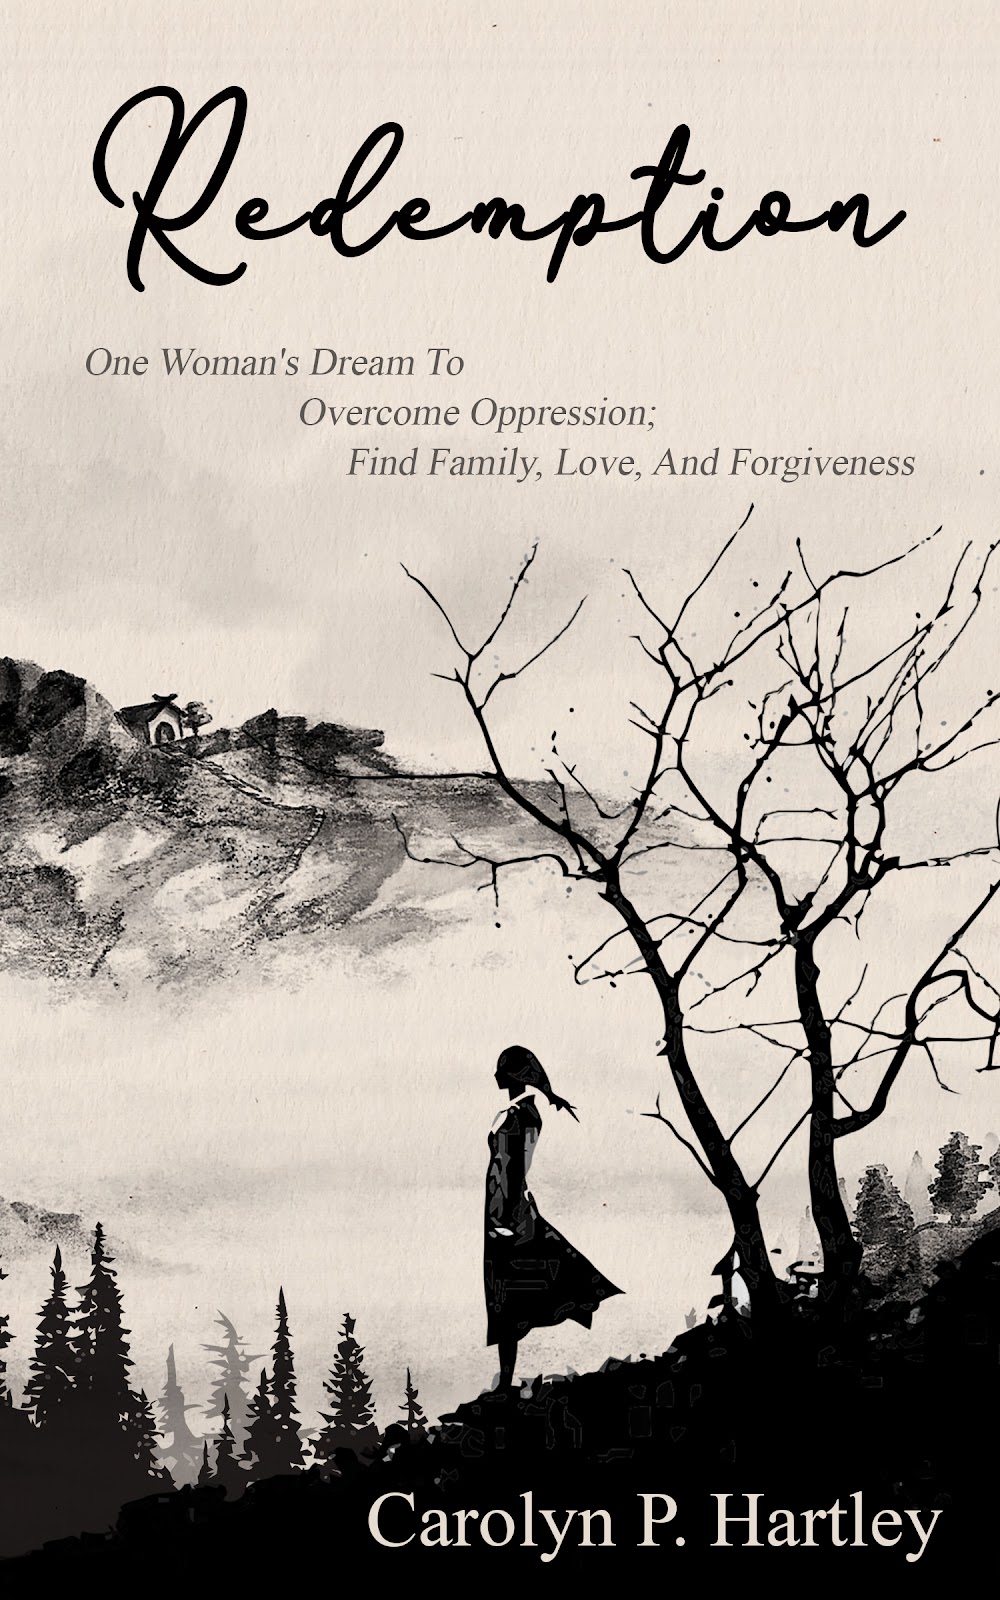 Redemption: One Woman’s Dream to Overcome Oppression, Find Family, Love and Forgiveness